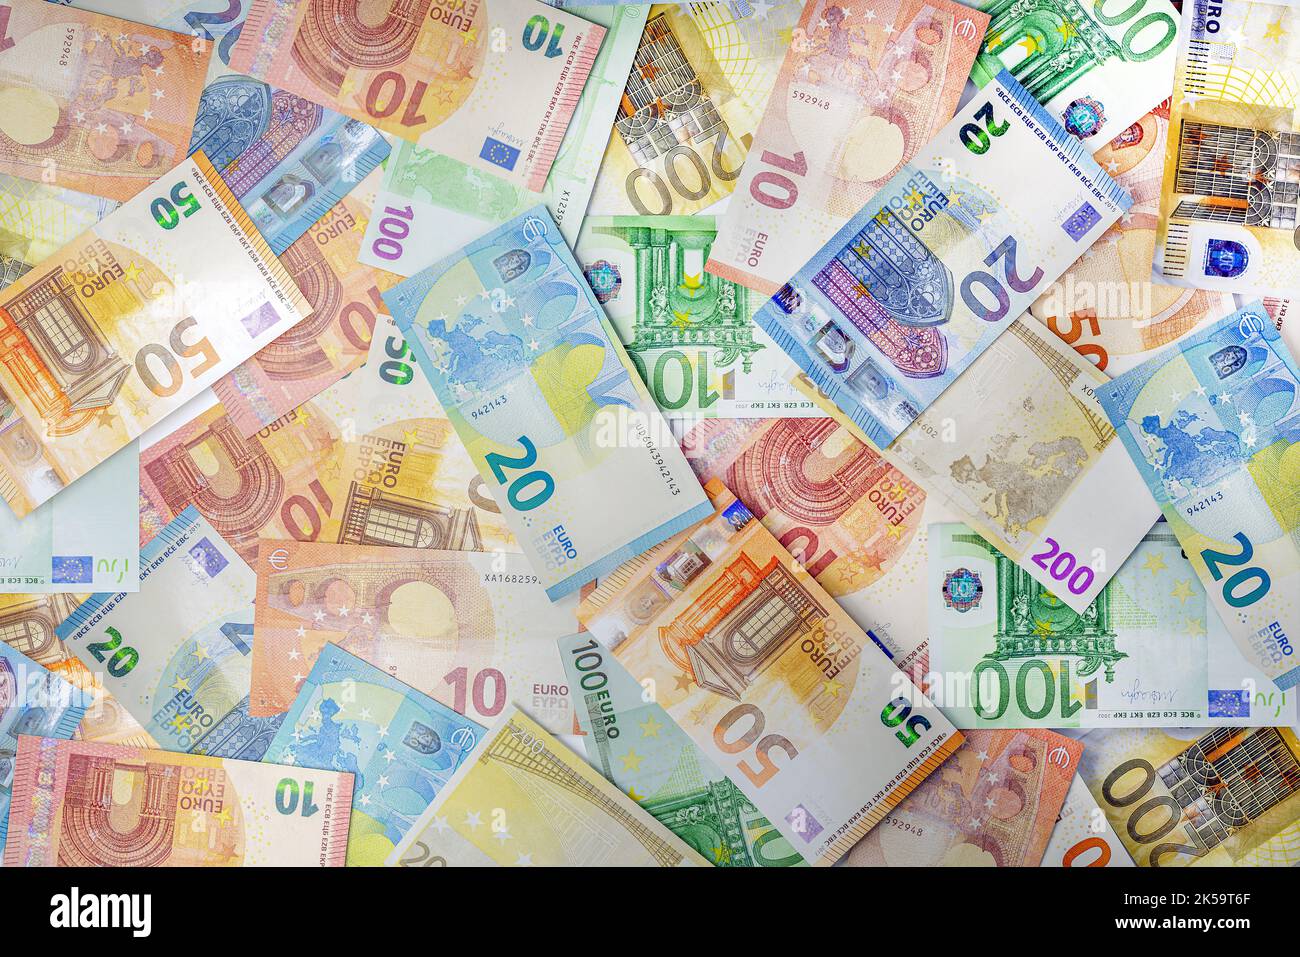 euro notes money background of banknotes European currency backgrounds of euros Stock Photo